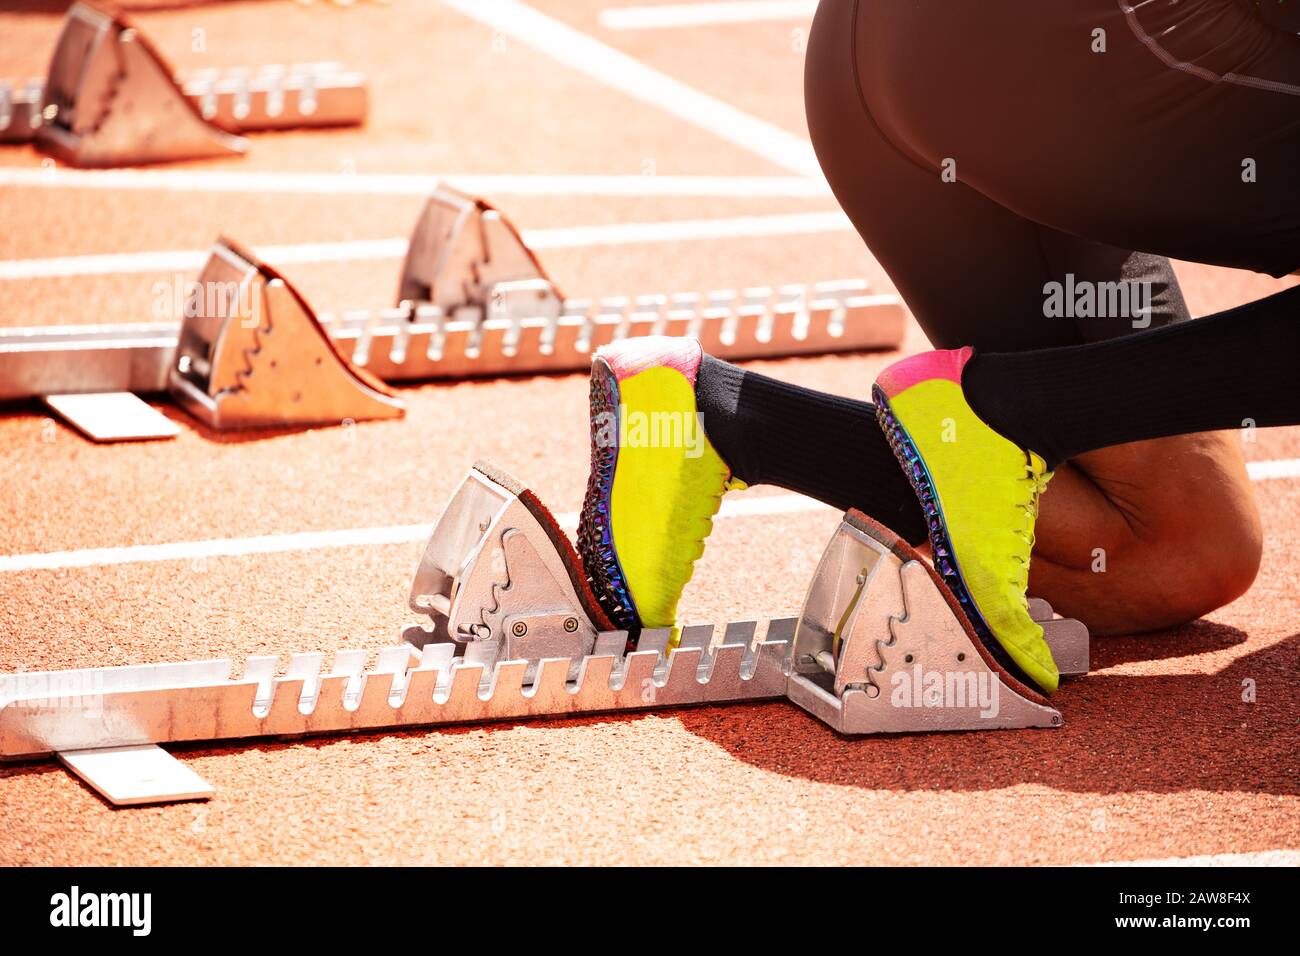 Close-up of shoes and start track before running sprint on stadium sport competition Stock Photo